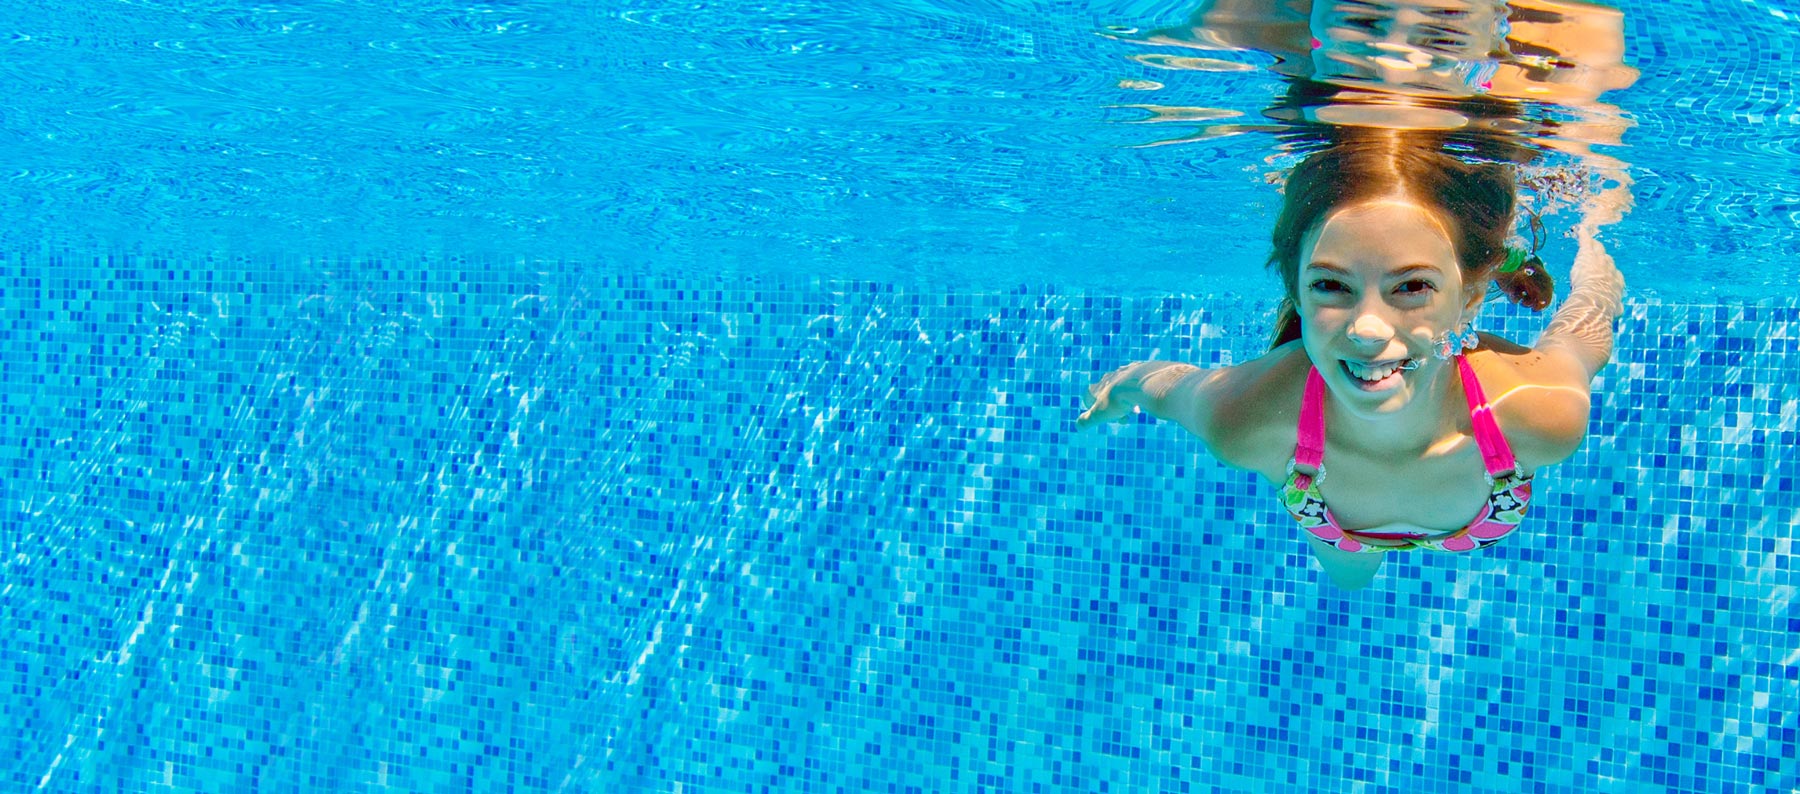 Heat Pumps for Swimming Pools